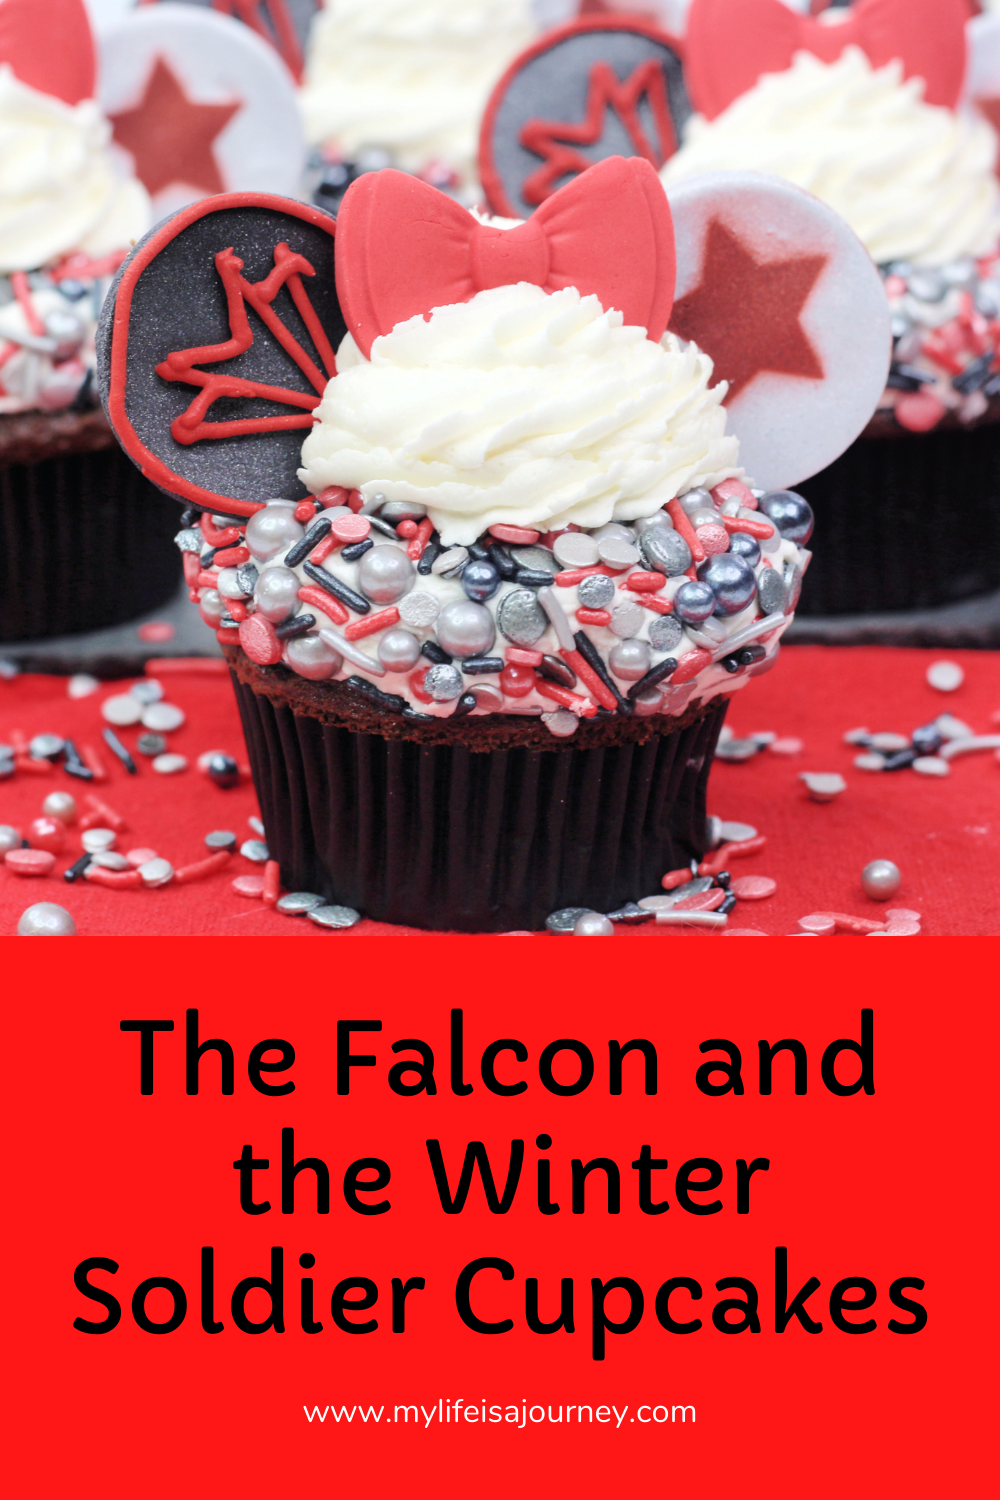 The Falcon and the Winter Soldier Cupcakes